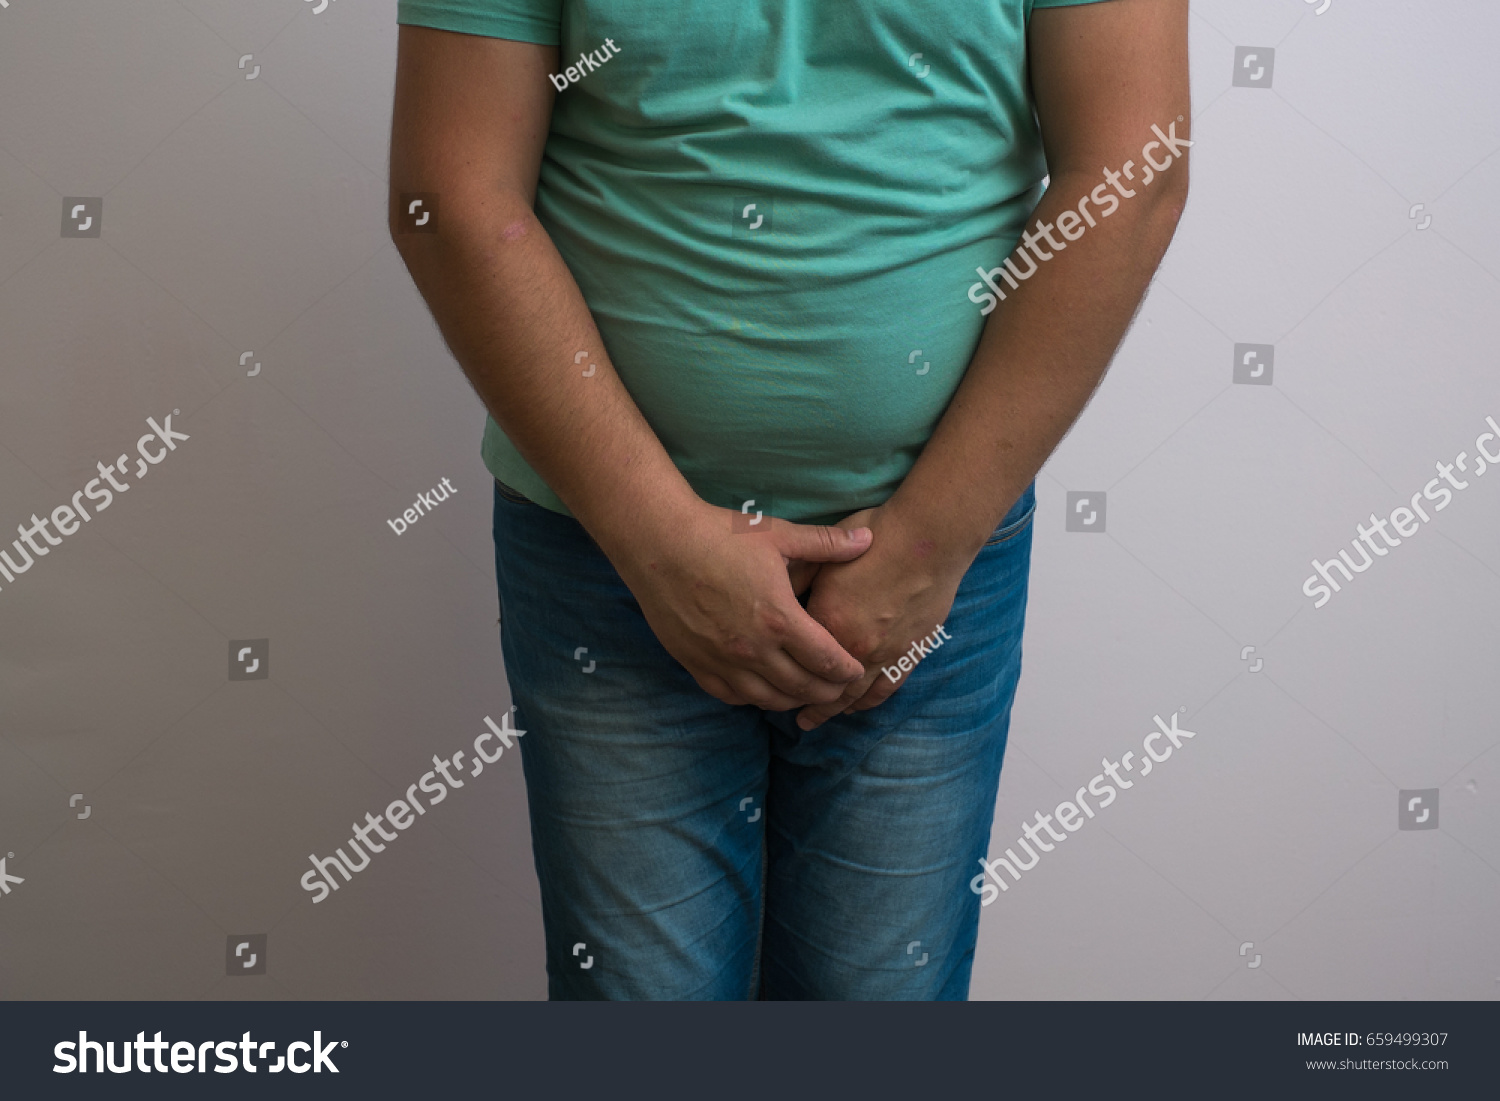 Man Hands Holding His Crotch He Stock Photo 659499307 Shutterstock